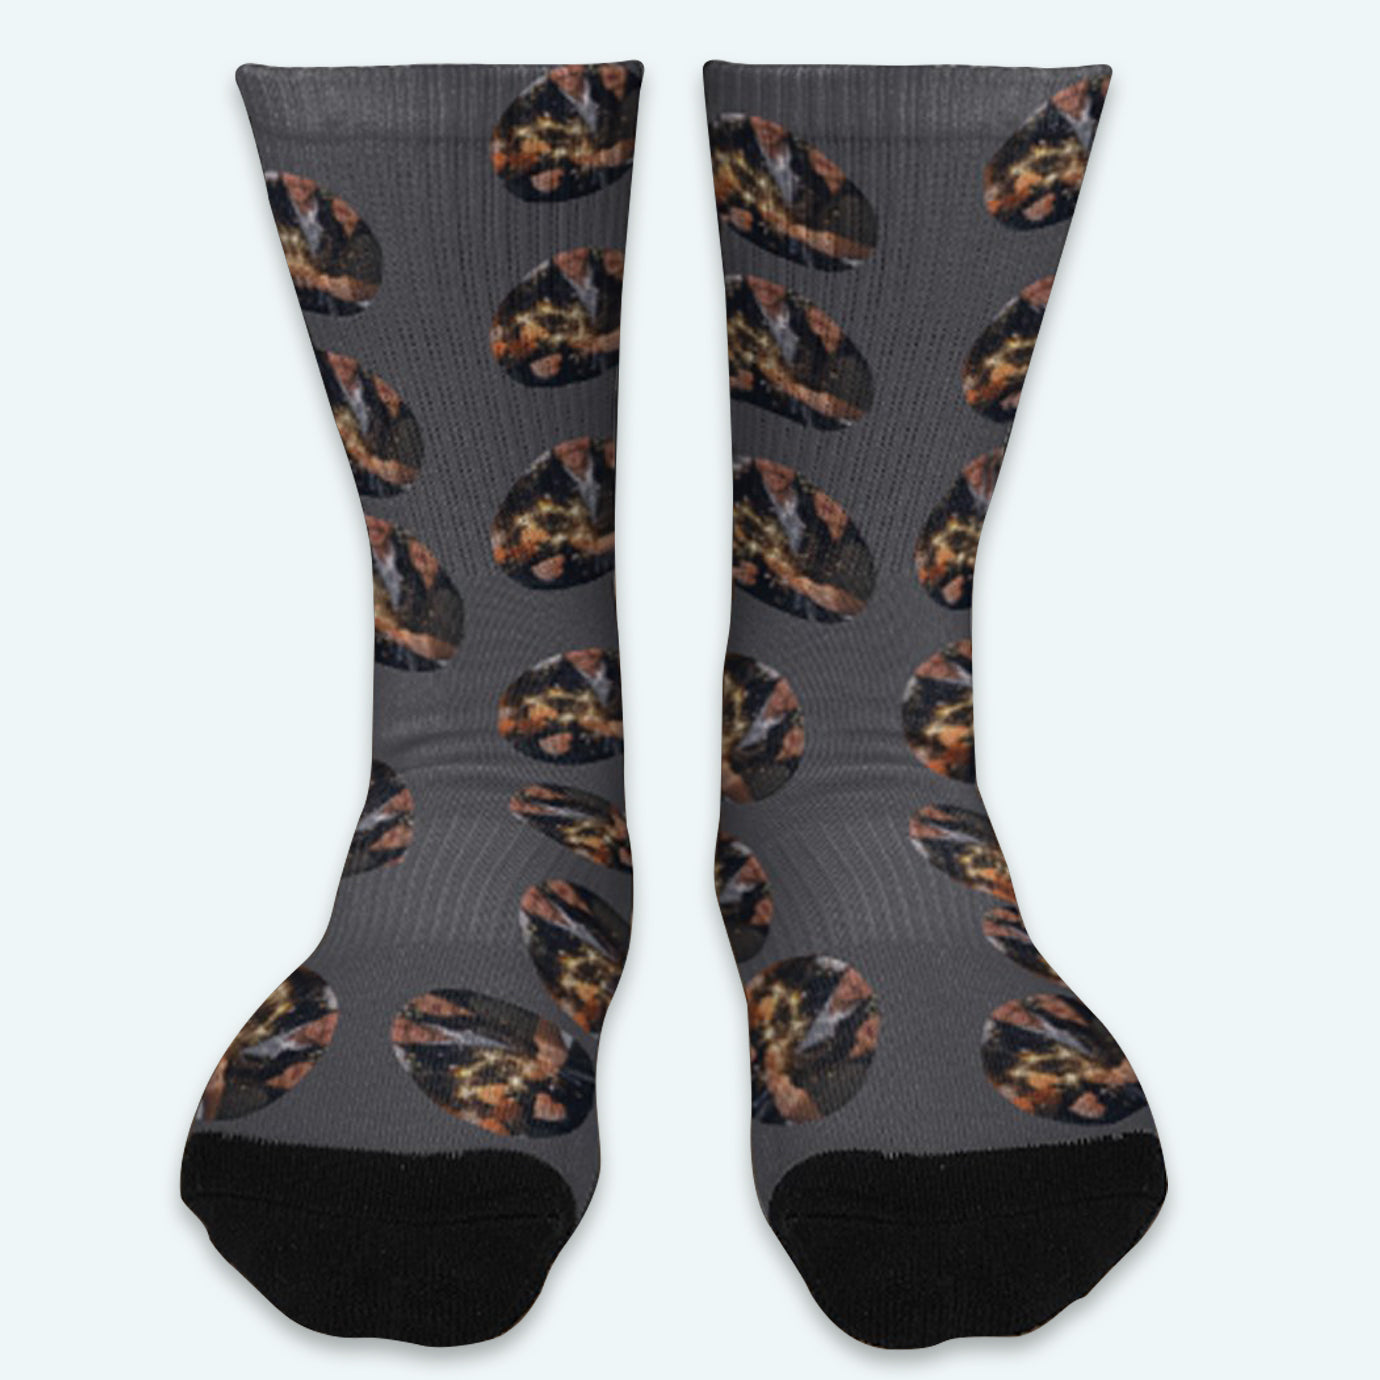 Custom Printed and Personalized Extra Large Socks for Men, Add Your Own  Text to Socks, Extended Socks for Big and Tall Men 